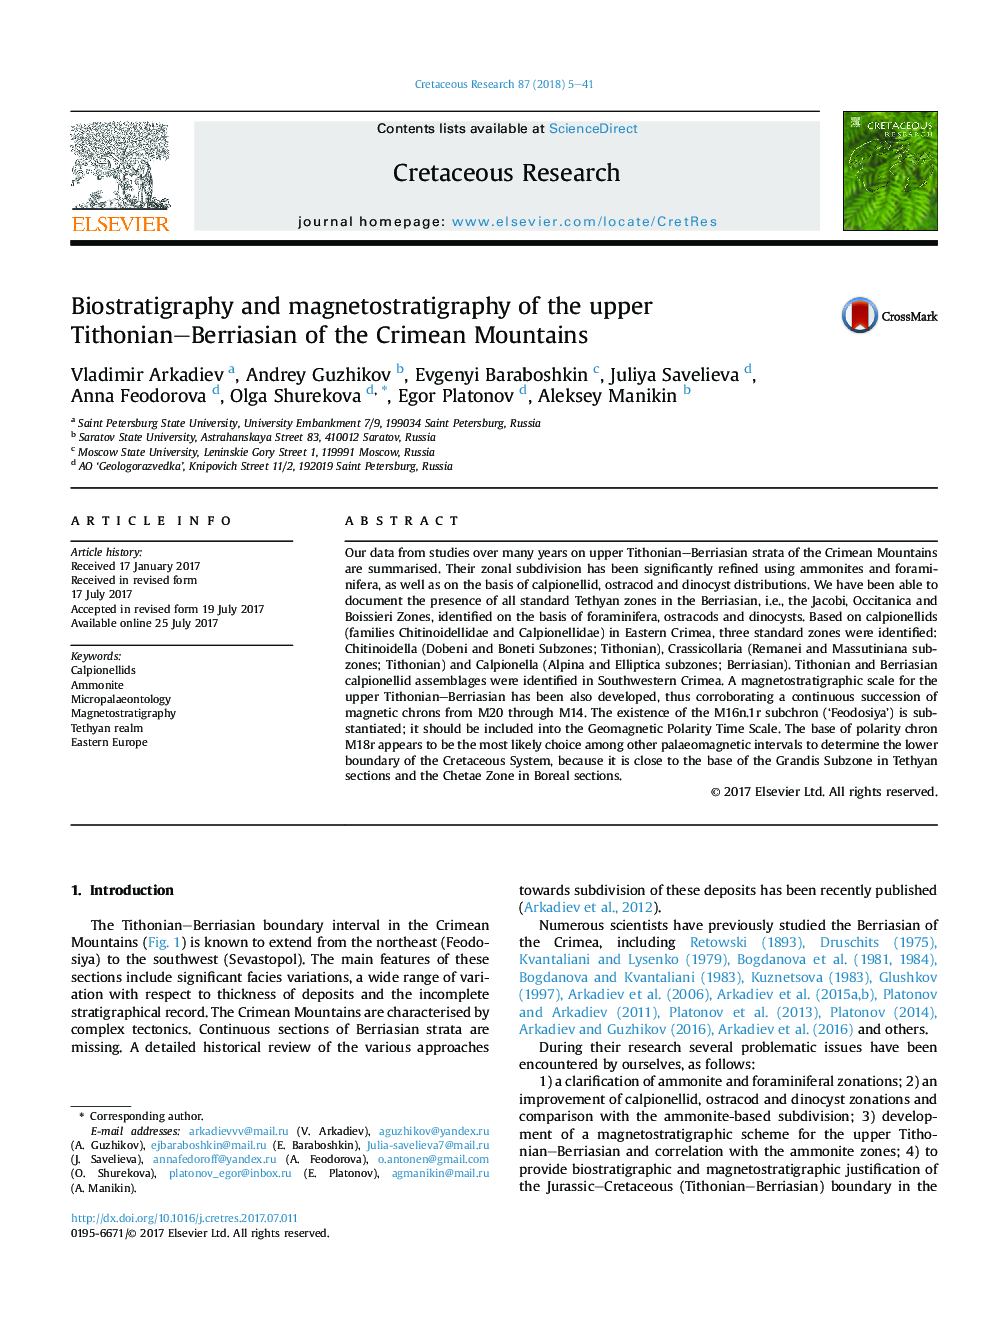 Biostratigraphy and magnetostratigraphy of the upper Tithonian-Berriasian of the Crimean Mountains